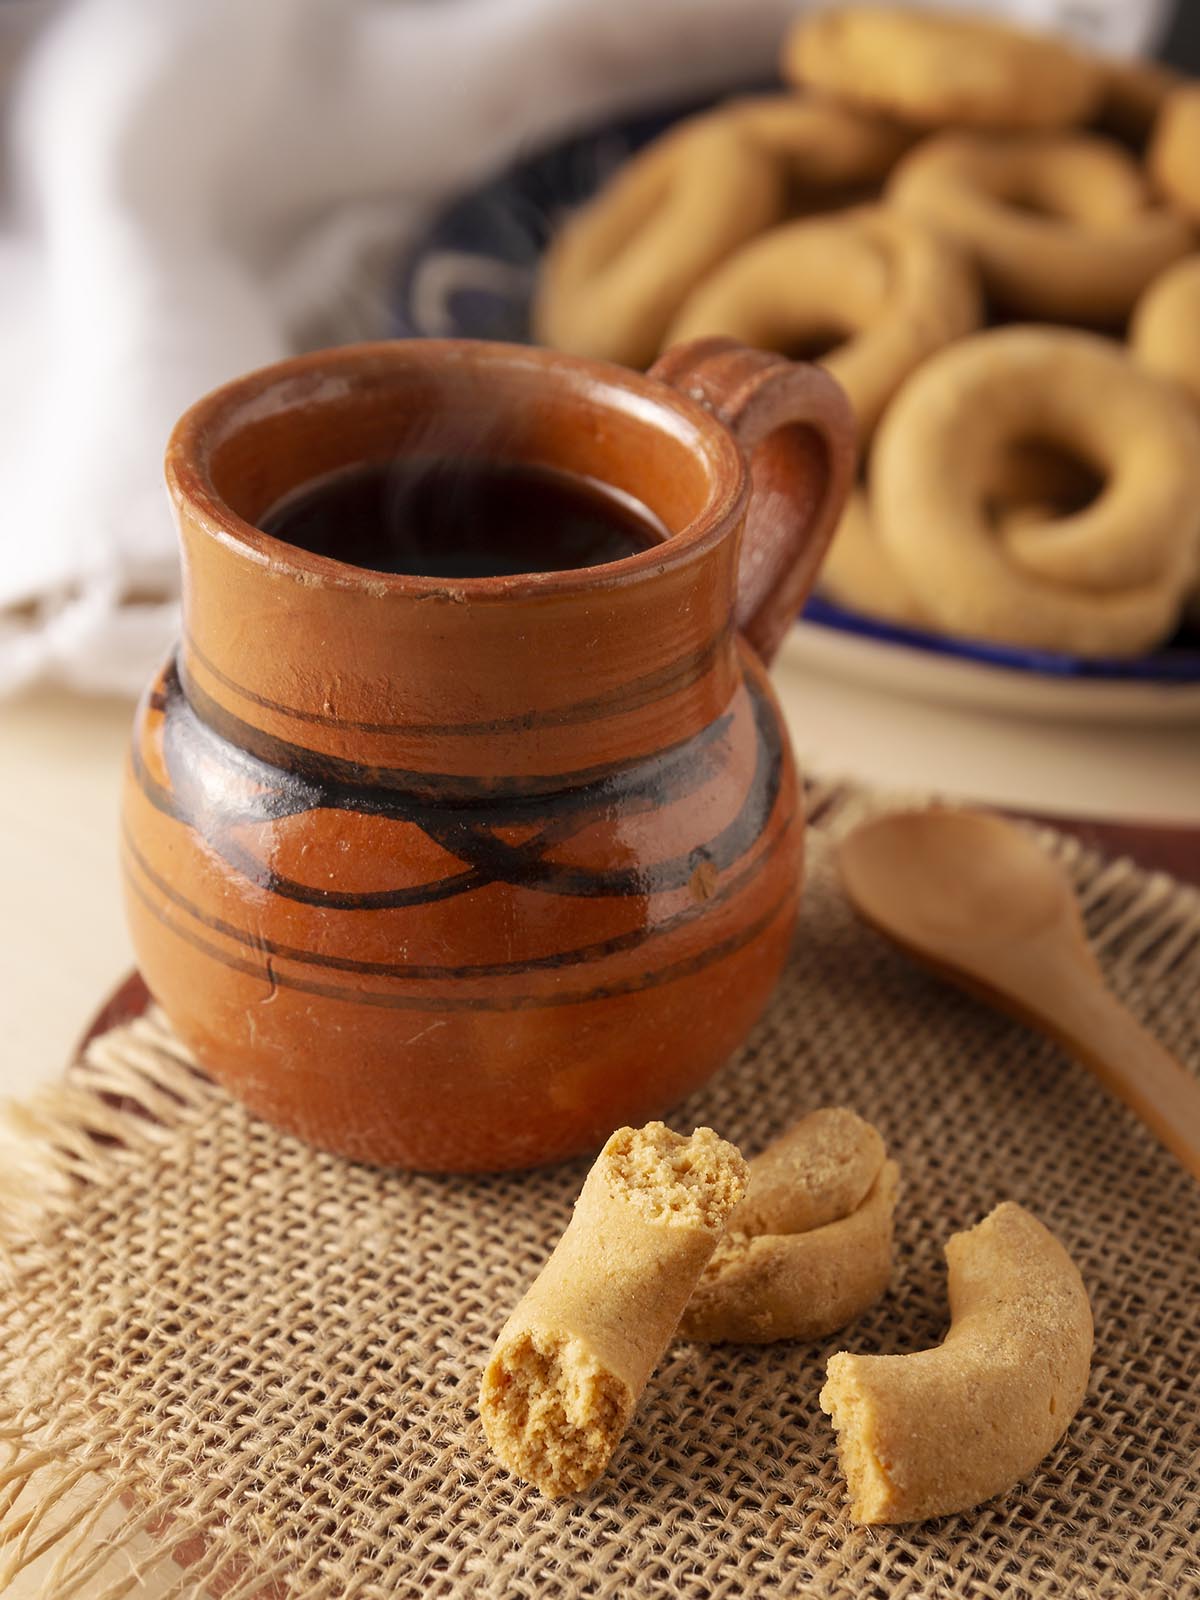 A clay mug with coricos cookies on the side.